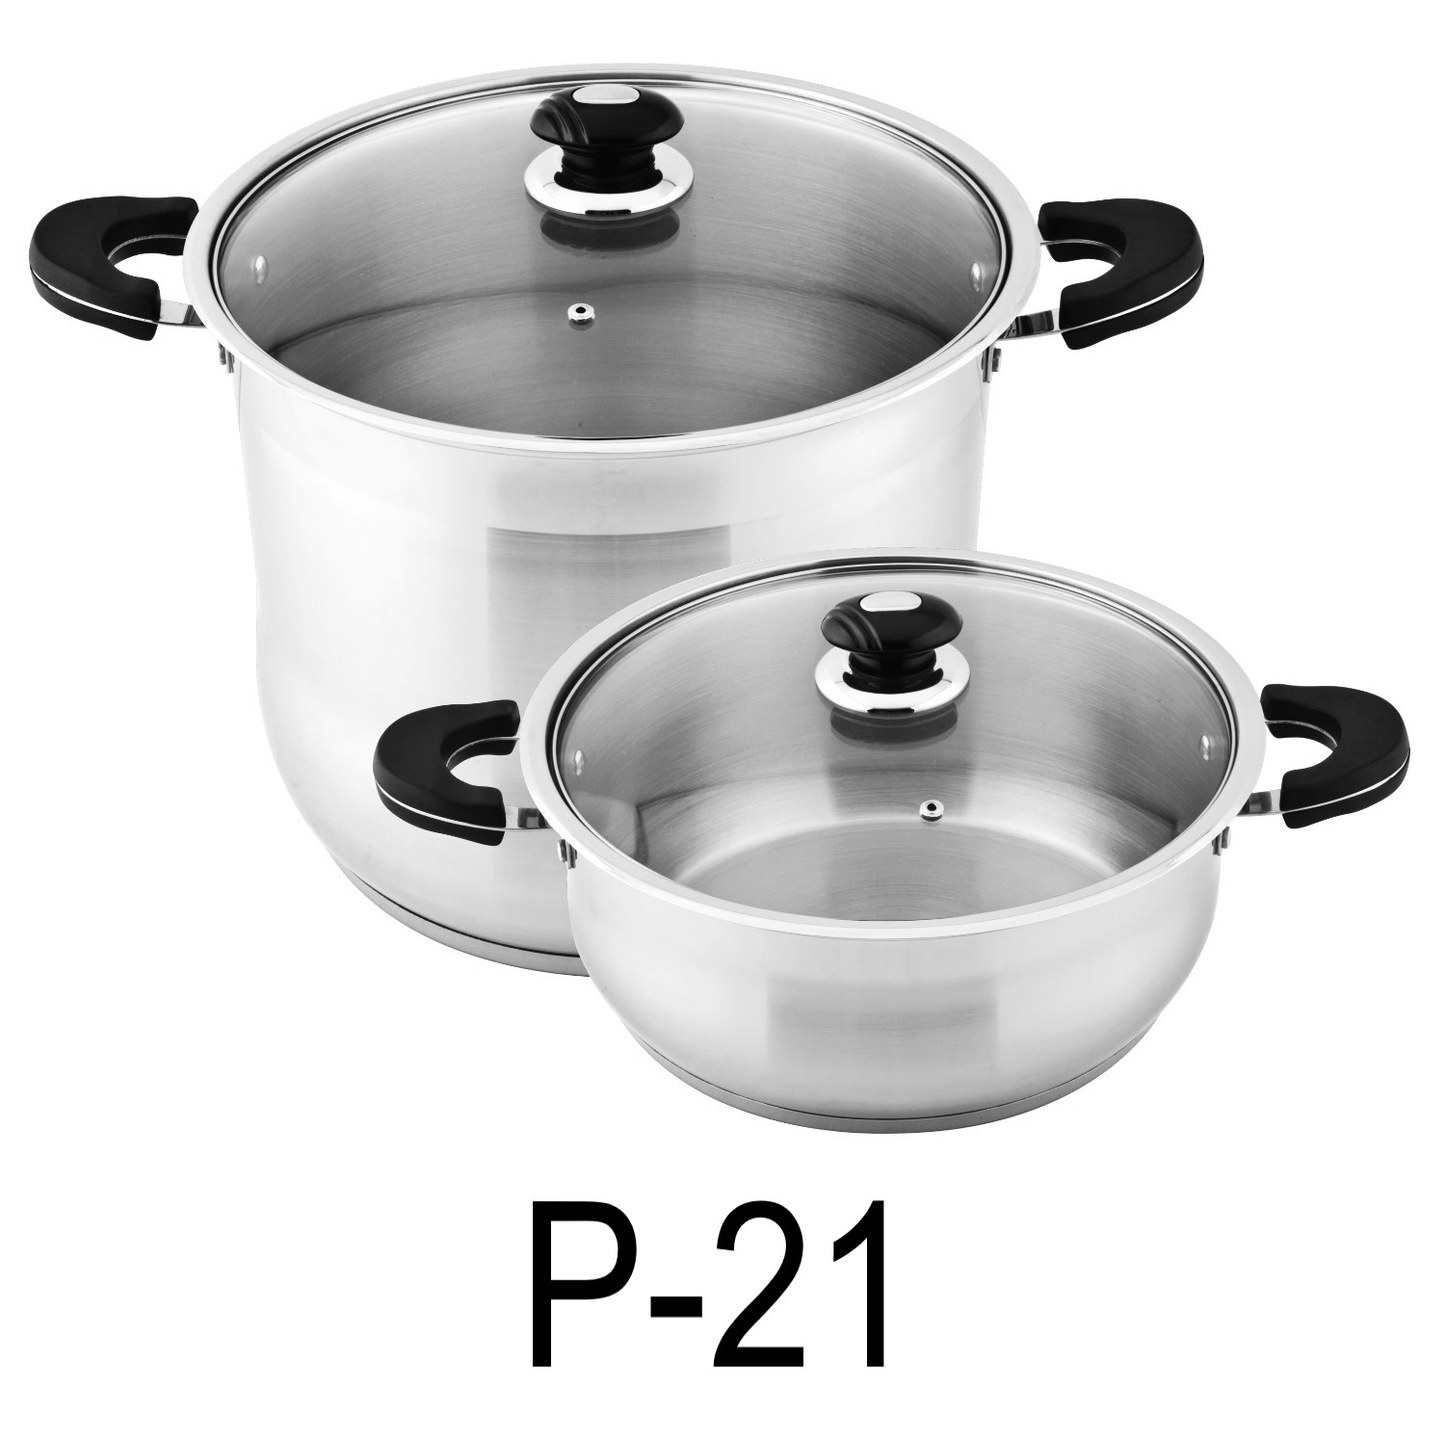 4 PC Stainless Steel Induction 18/10 Stockpot & Low Pot